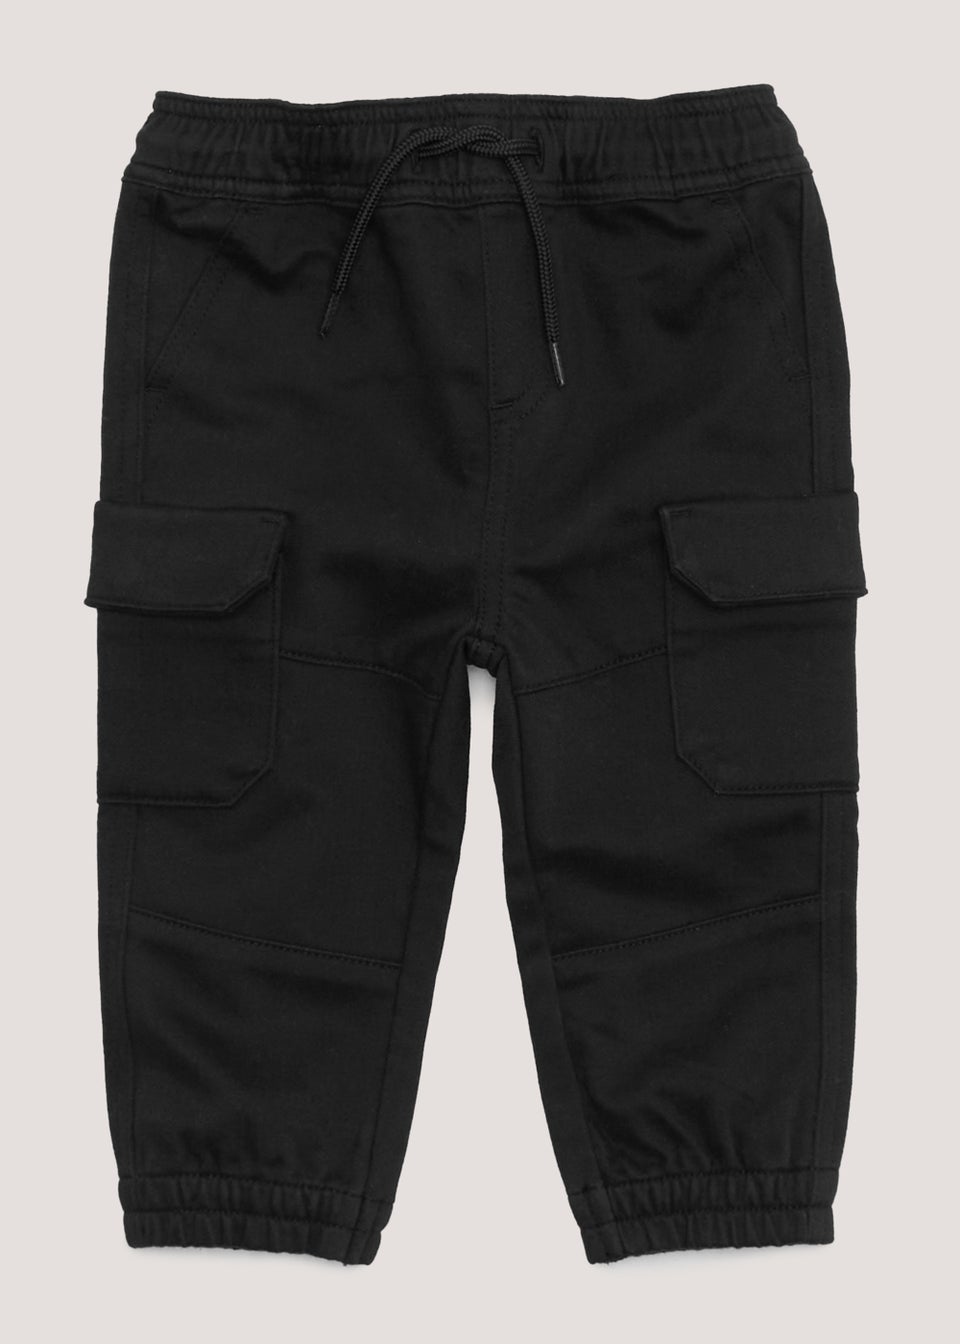 Boys Black Knitted Cargo Trousers (9mths-6yrs) - Matalan